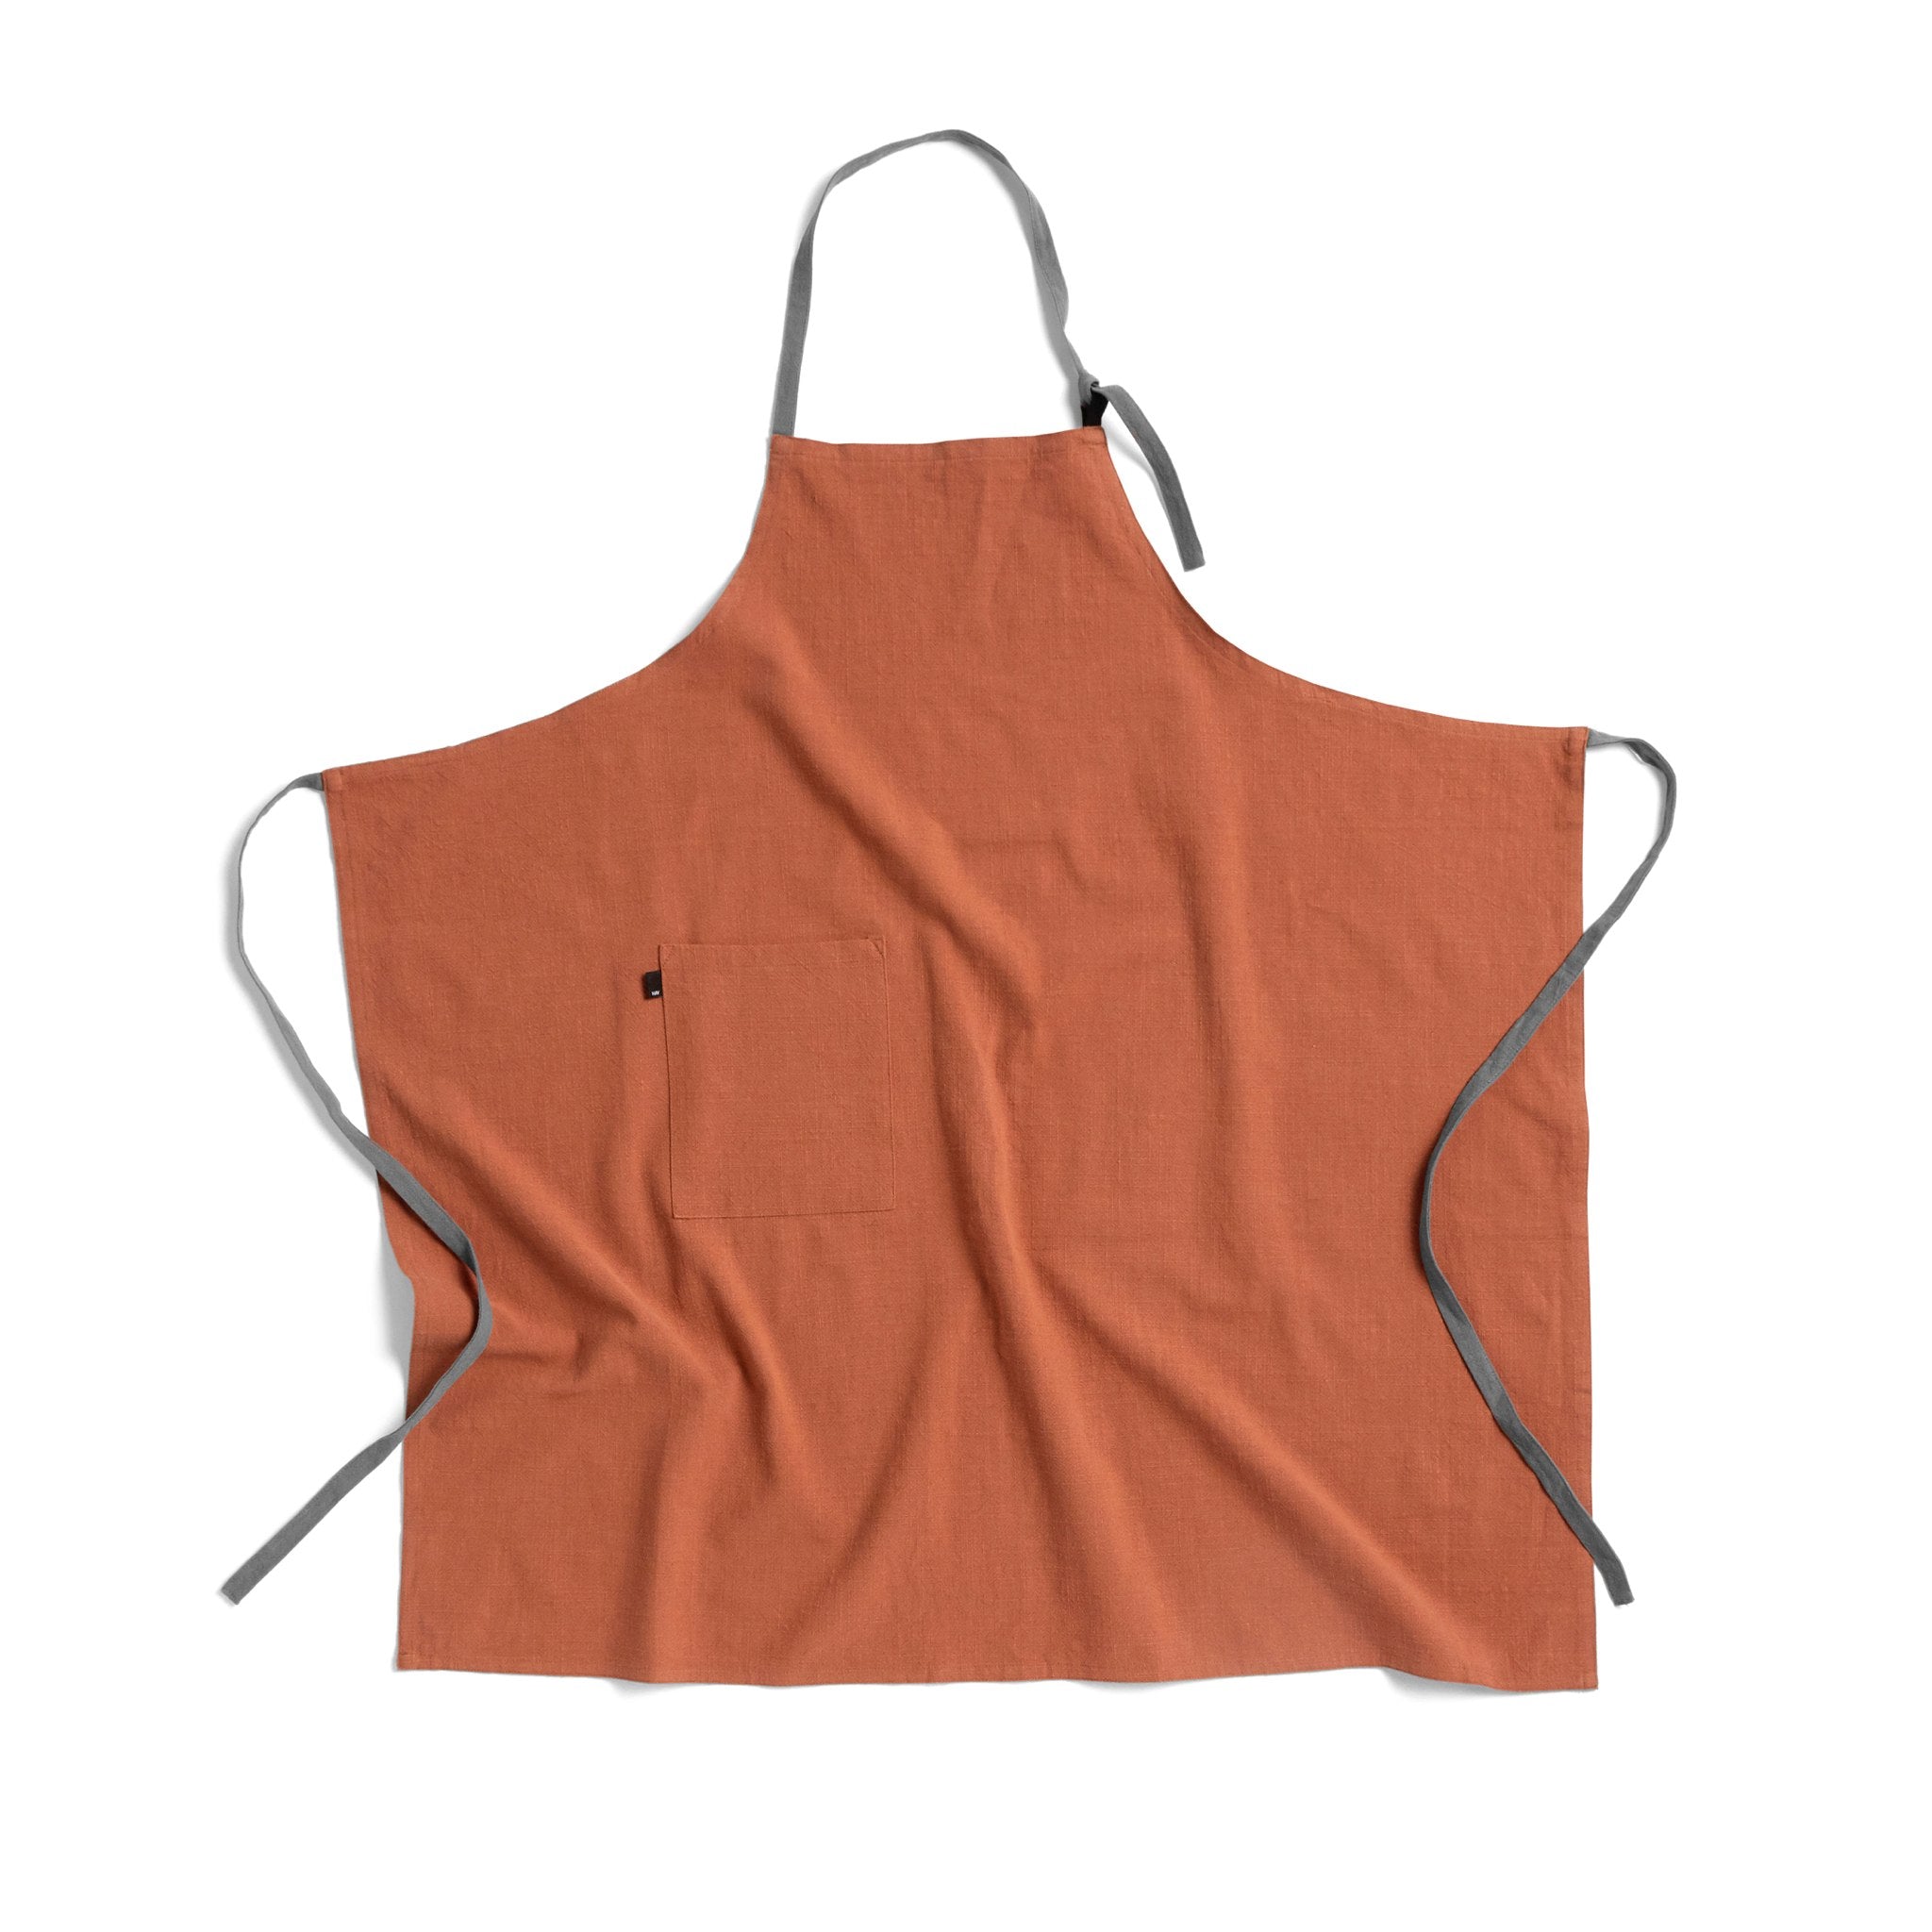 Wrap Apron by Hay